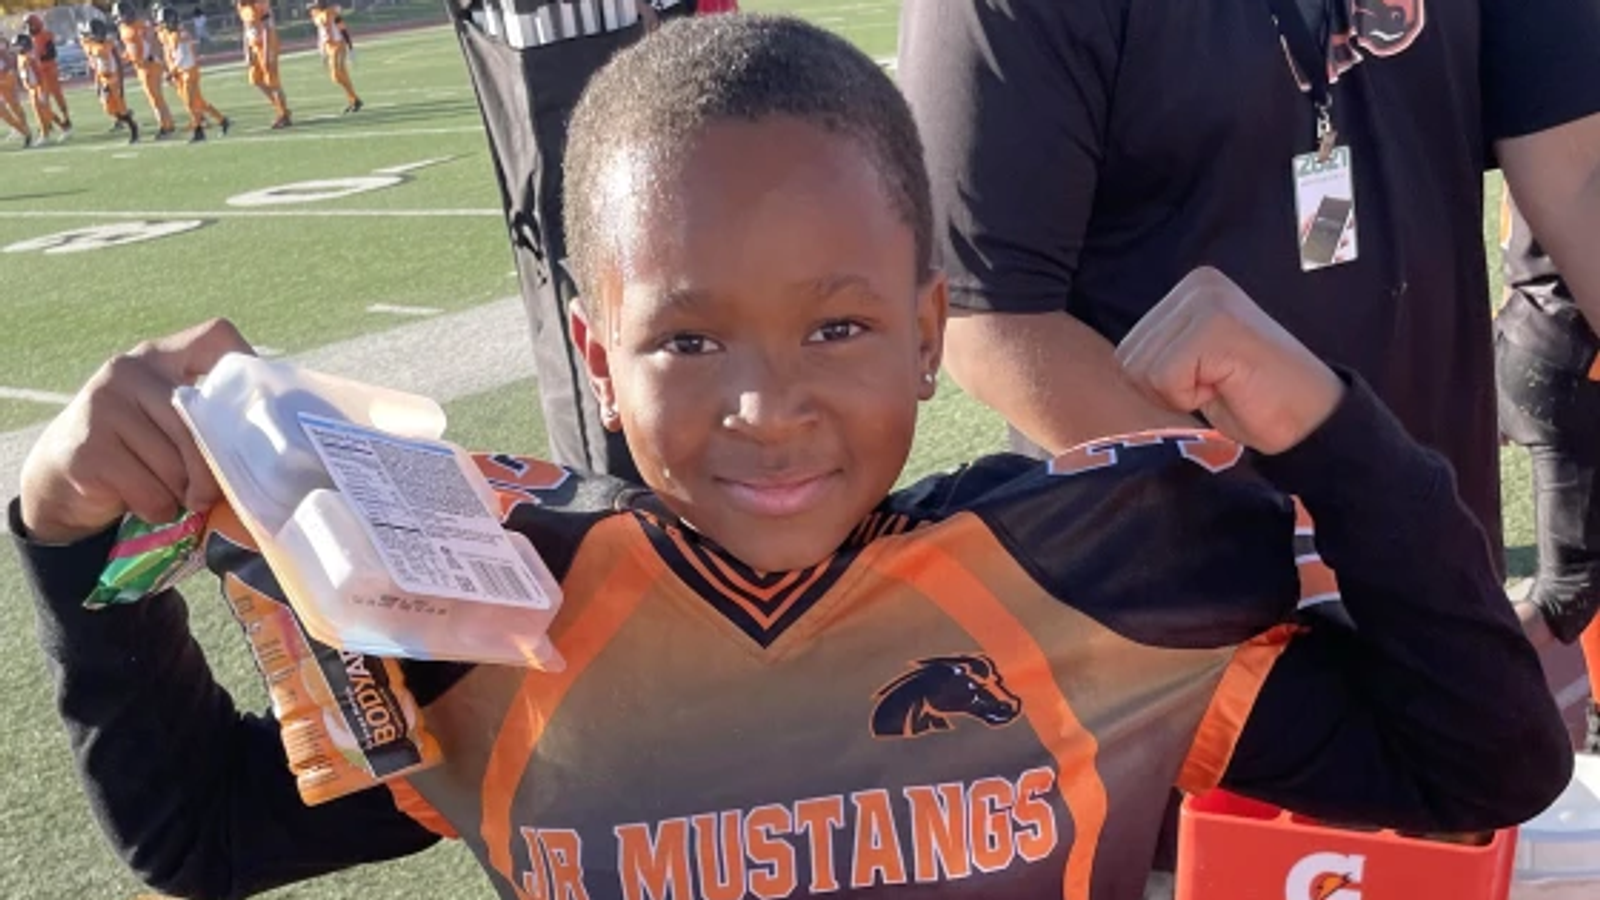 Keith Frierson: Boy shot dead by 10-year-old who lost bike race, mum claims